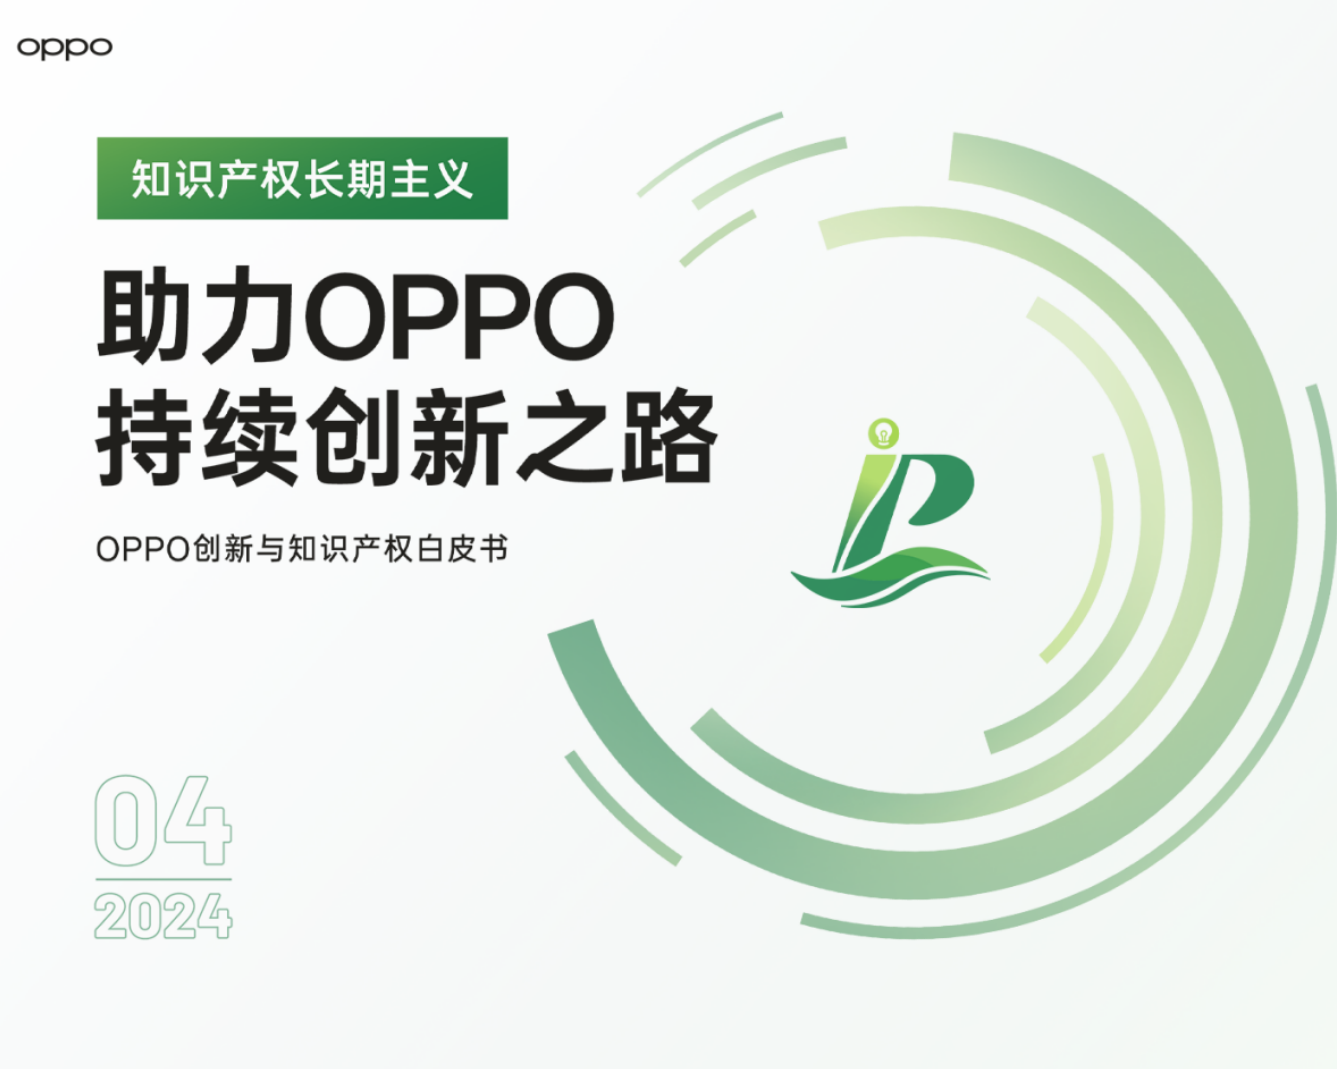  The 20th anniversary of OPPO, the first white paper on innovation and intellectual property was released